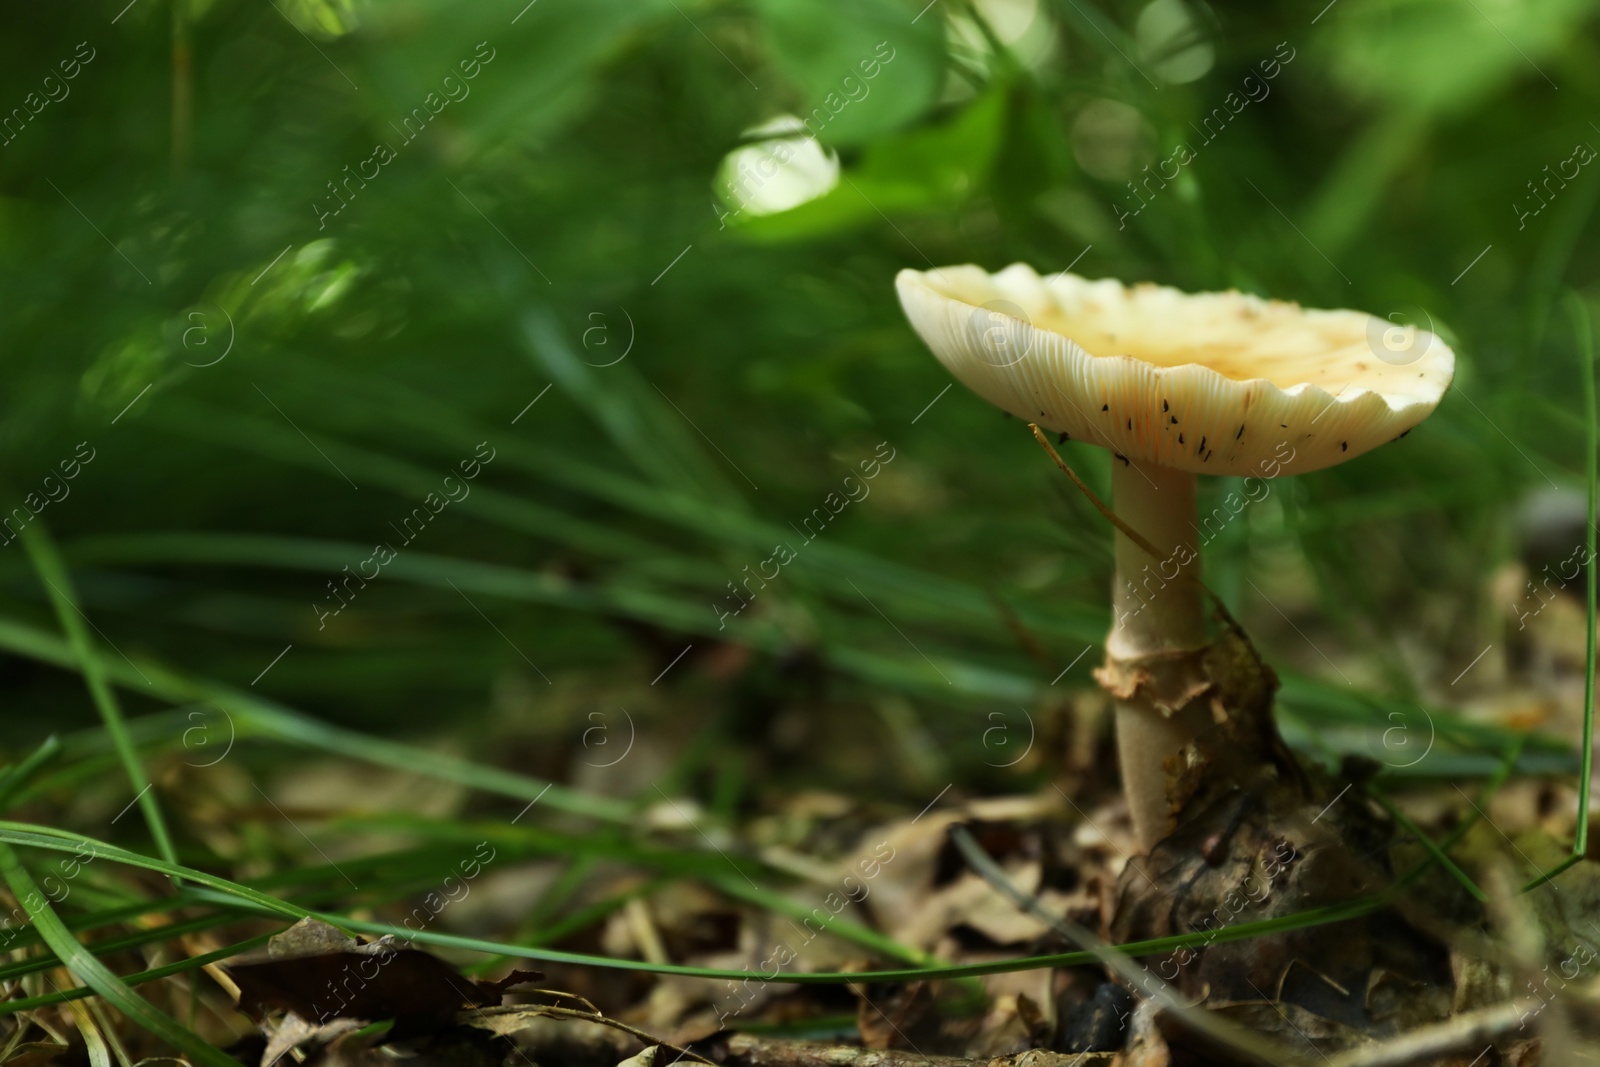 Photo of One poisonous mushroom growing among fallen leaves in forest, space for text